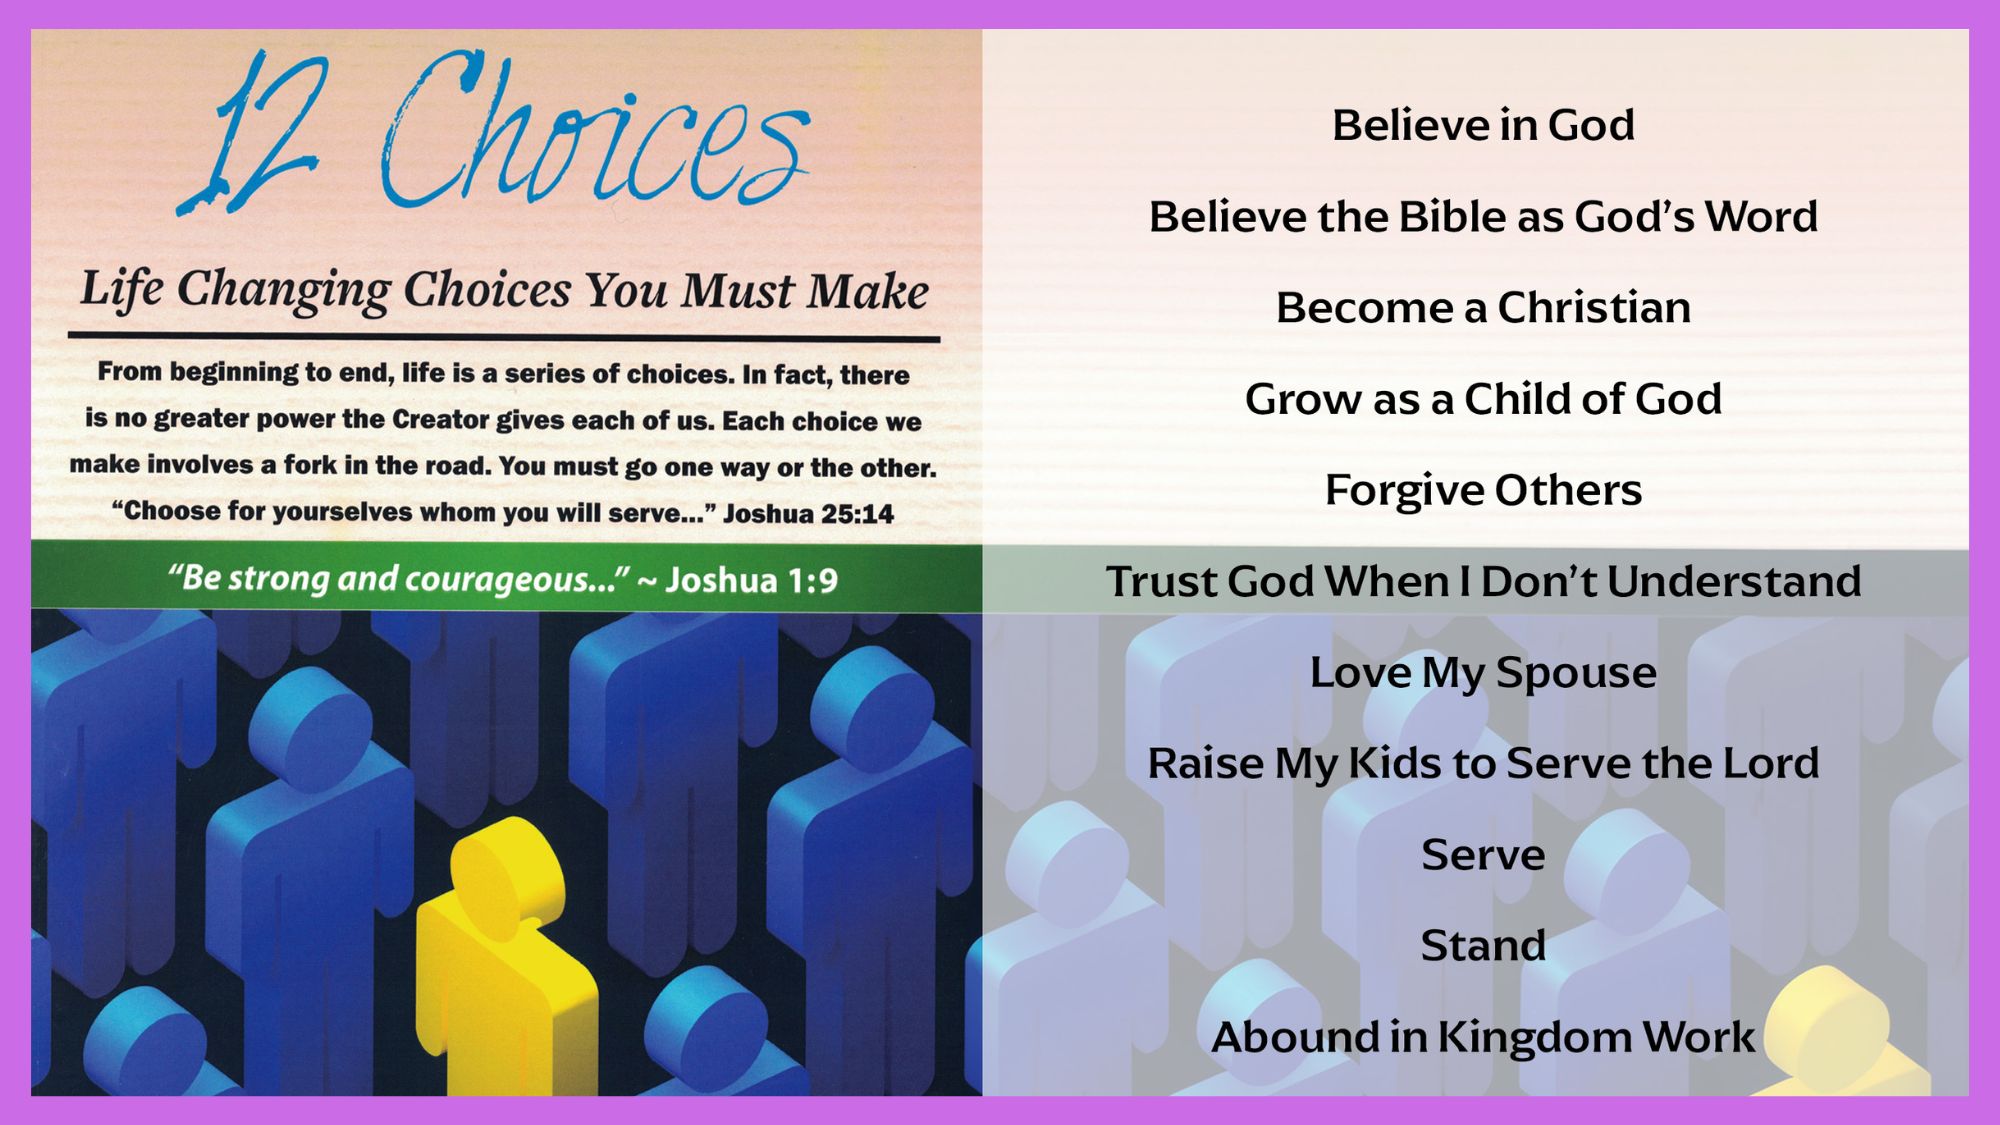 12 Choices - Life Changing Choices You Must Make: Choice # 7 Love My Spouse